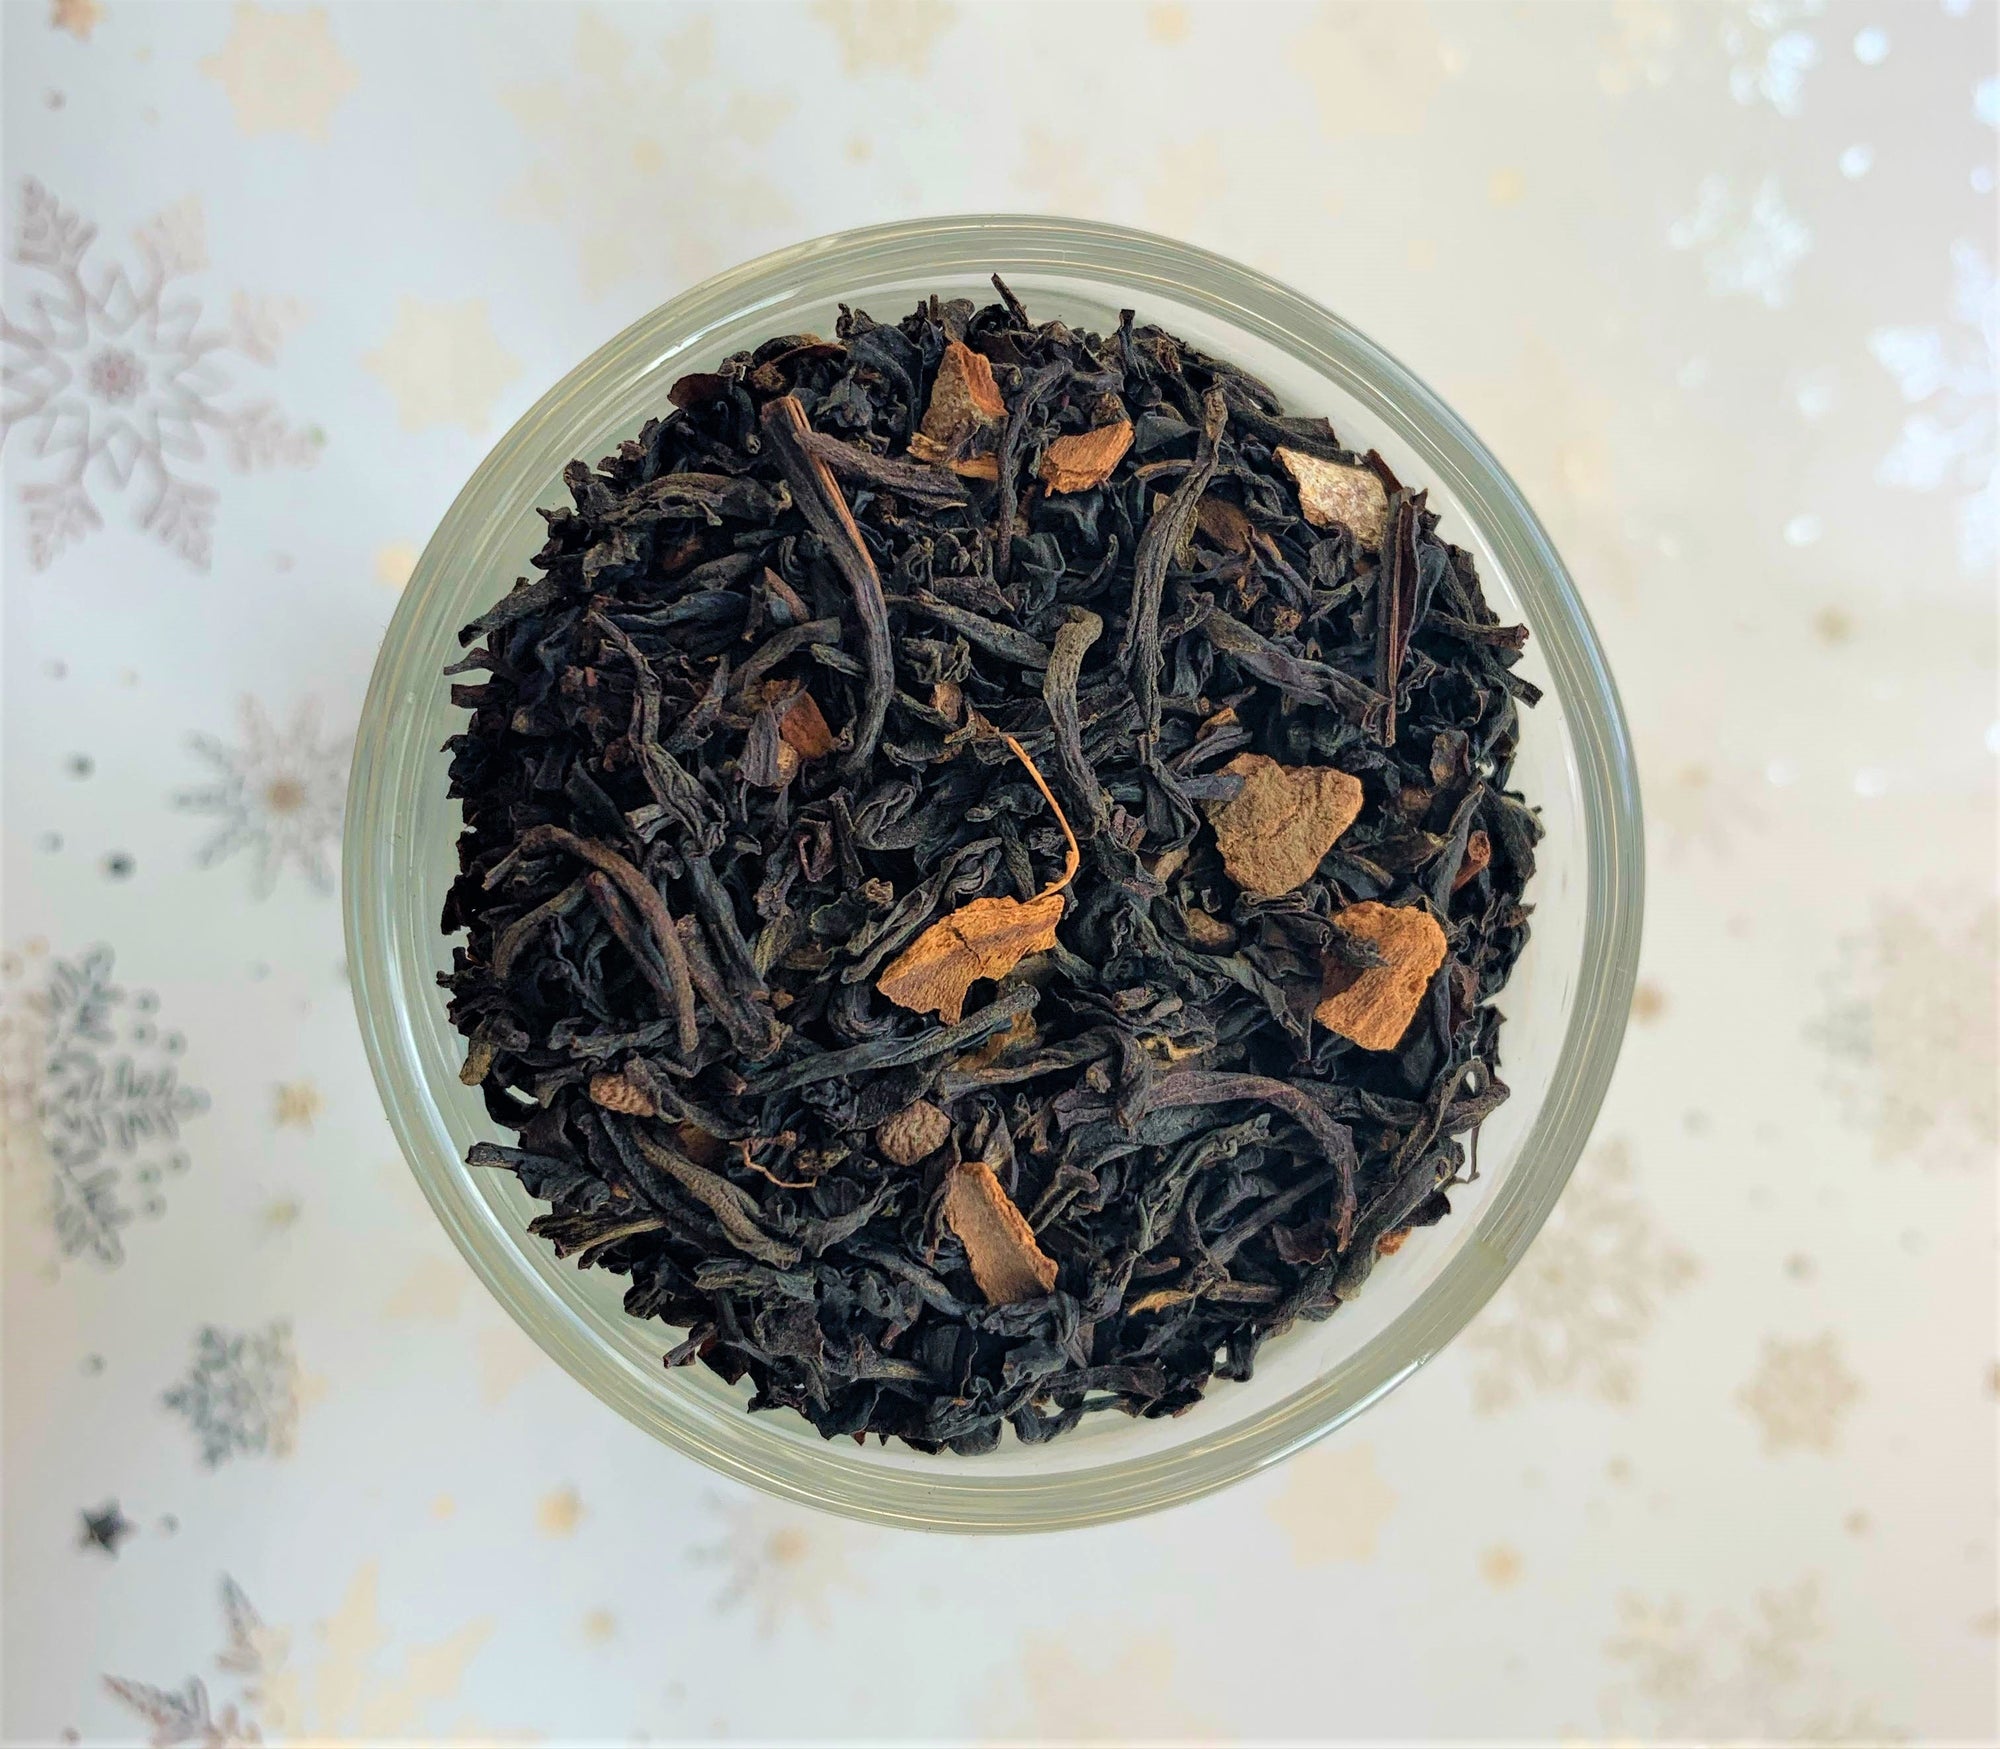 Relax with some Spiced Chai this Christmas